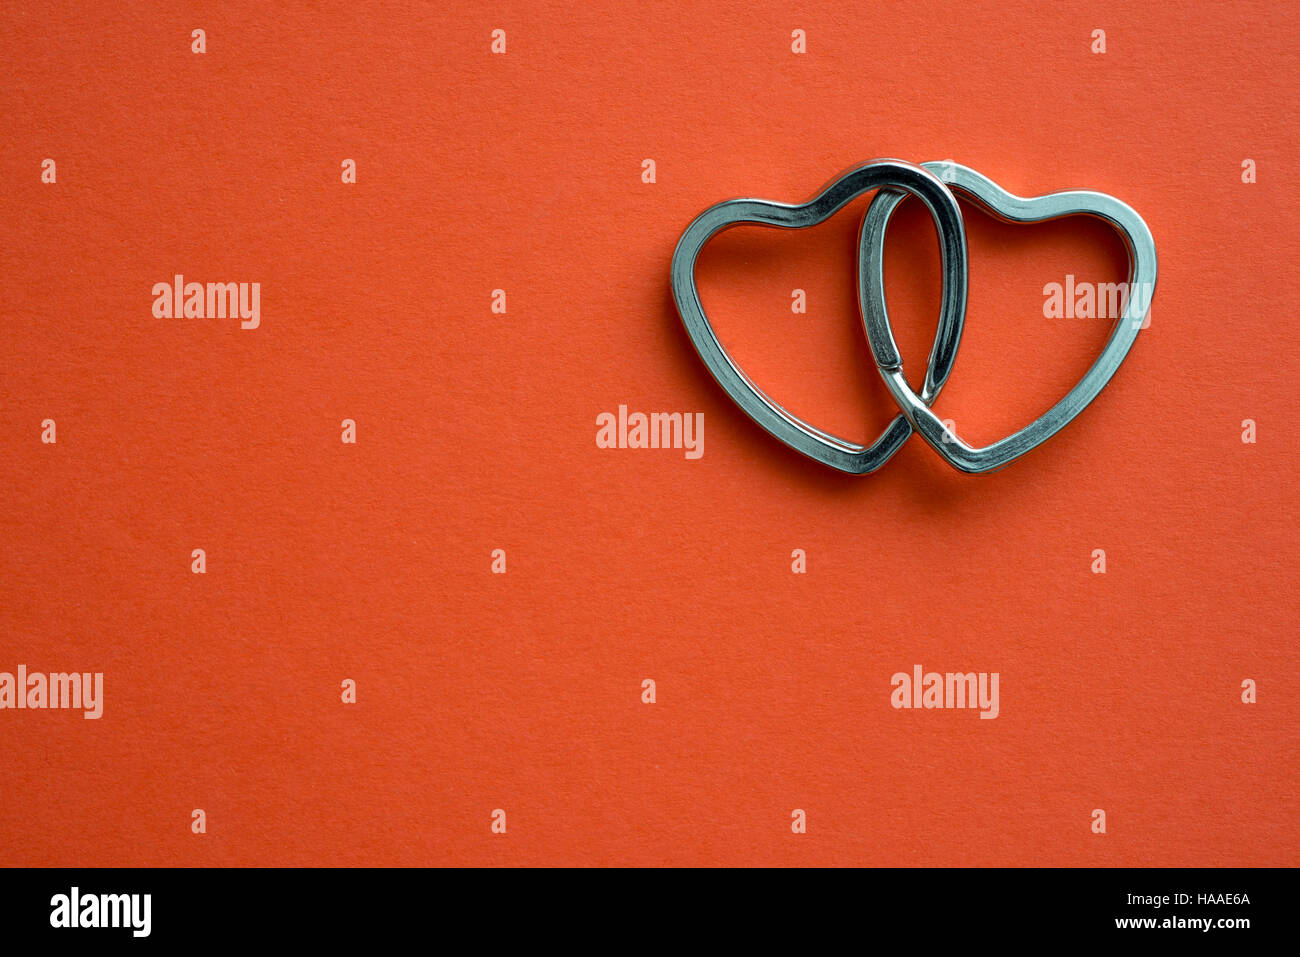 two linked metallic hearts on red background Stock Photo